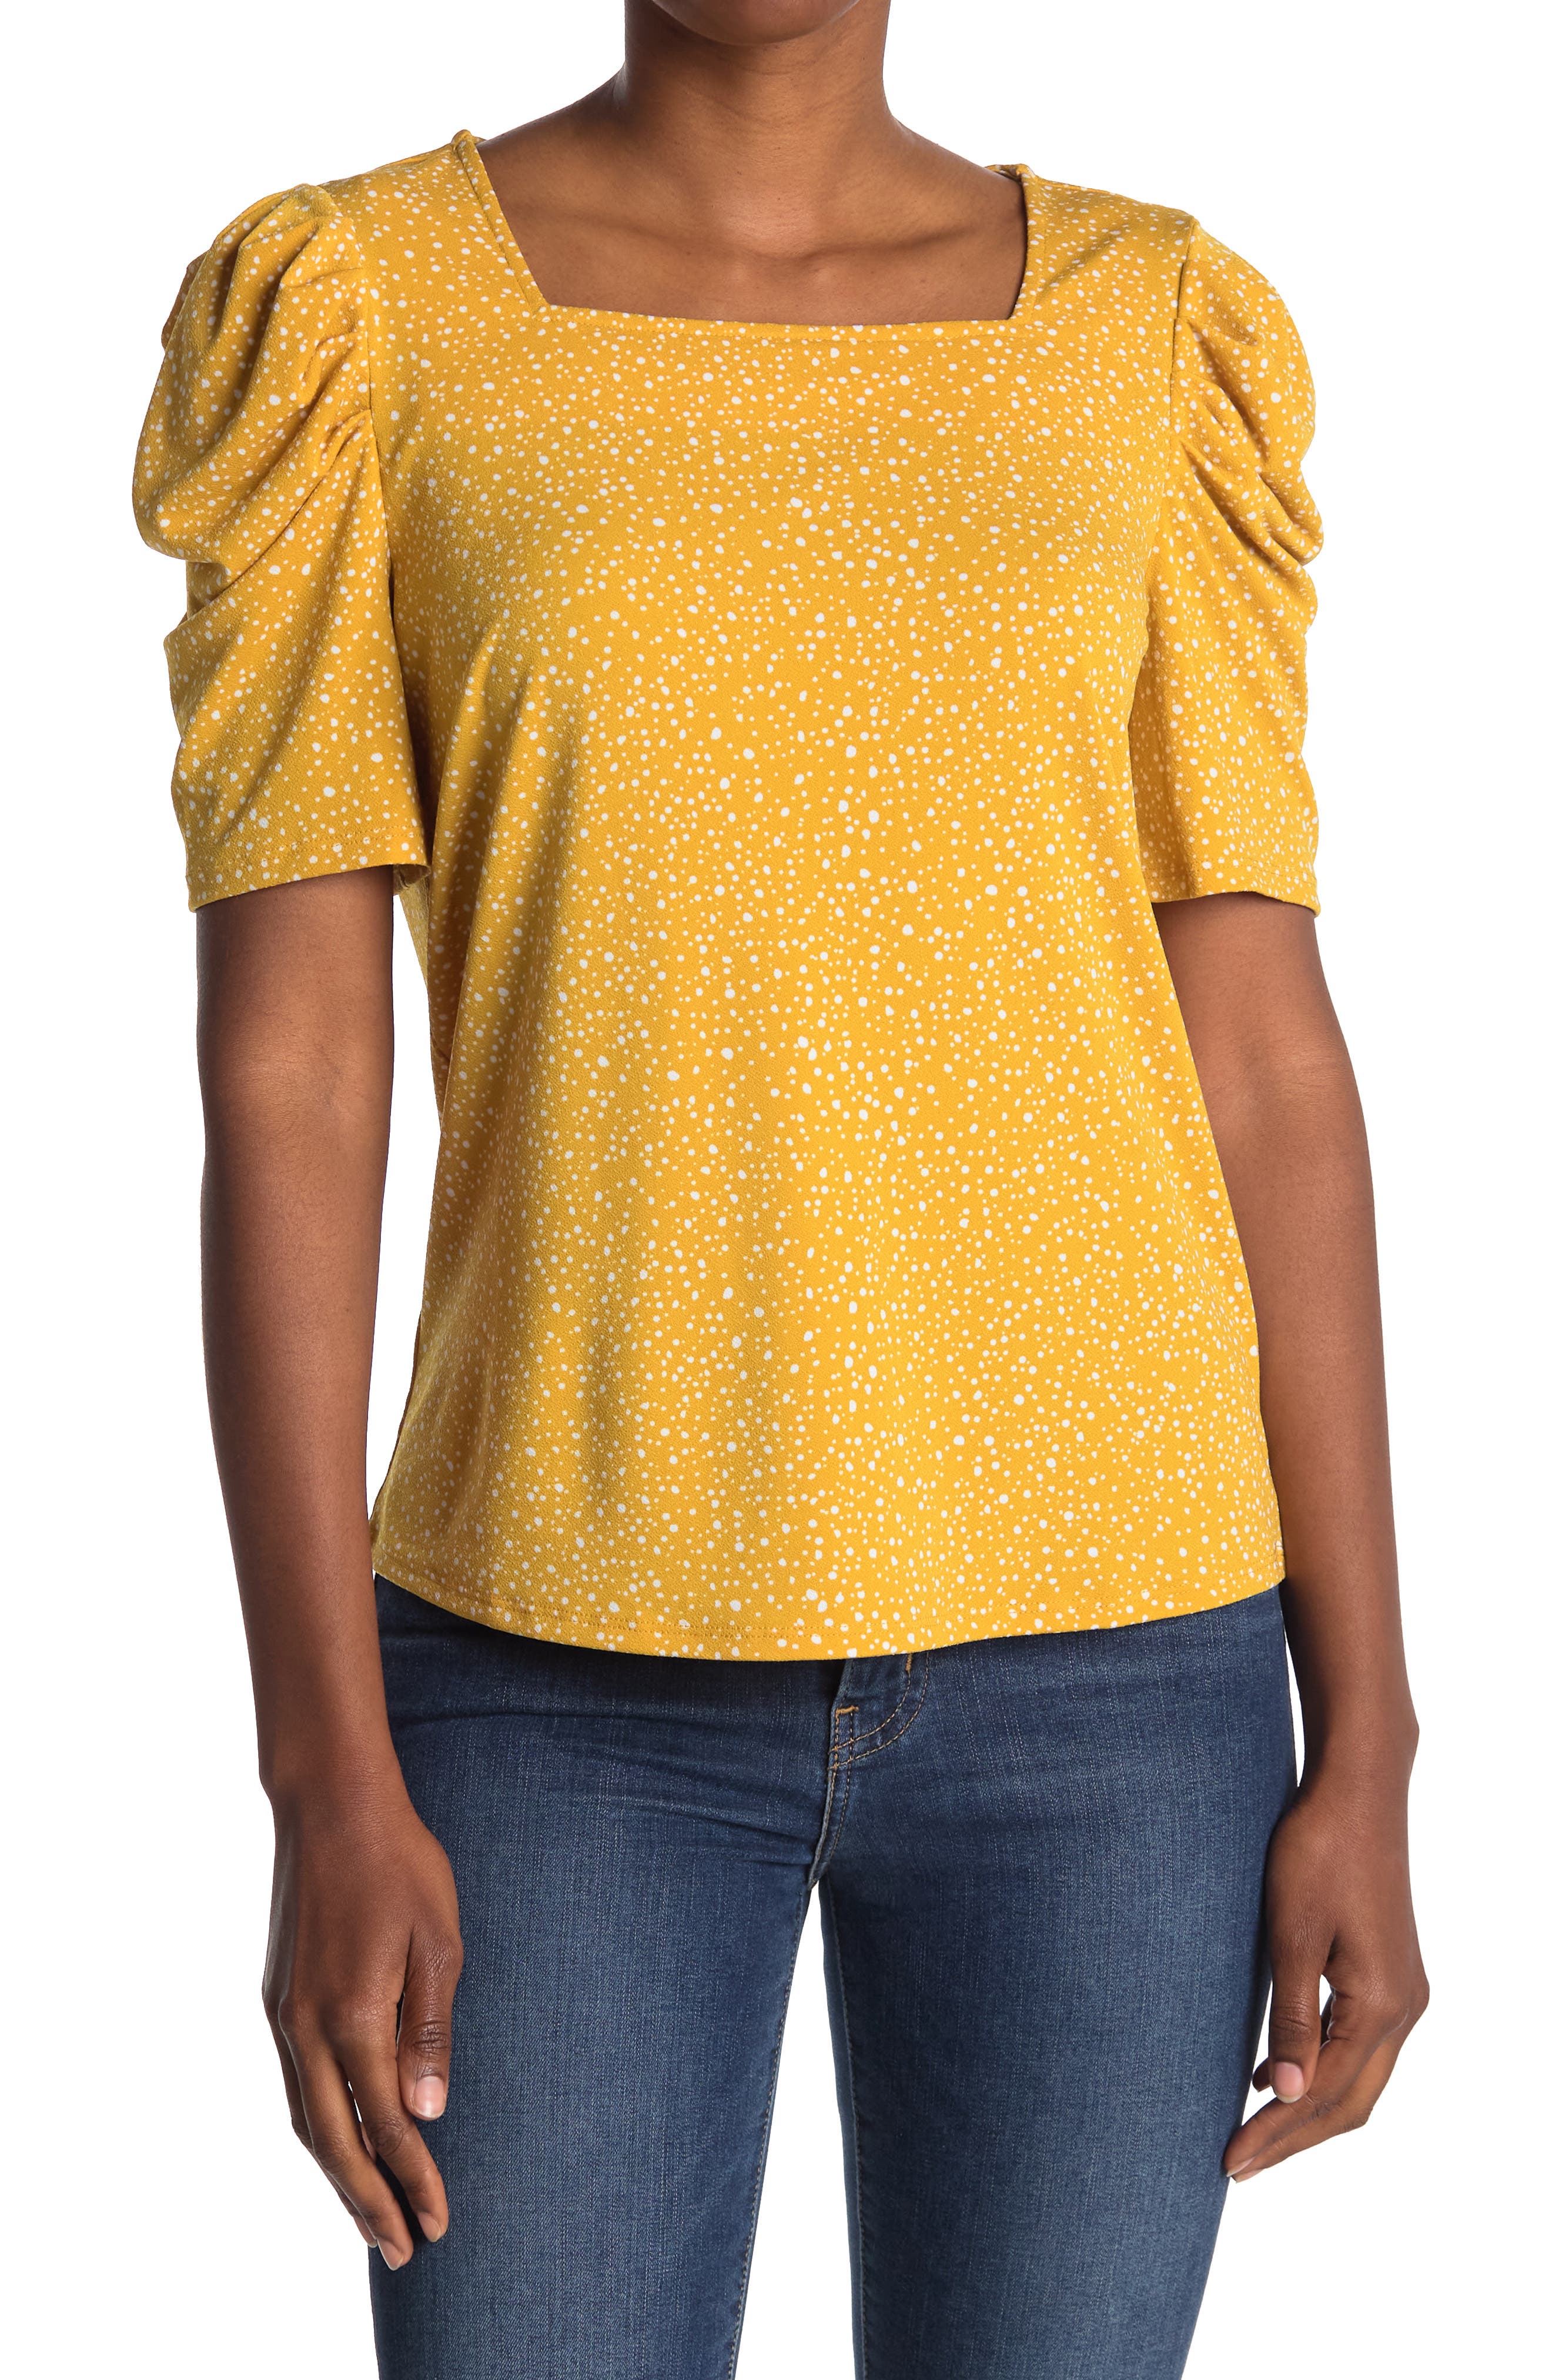 Adrianna Papell Printed Moss Crepe Square Neck Top In Gldjggeddt